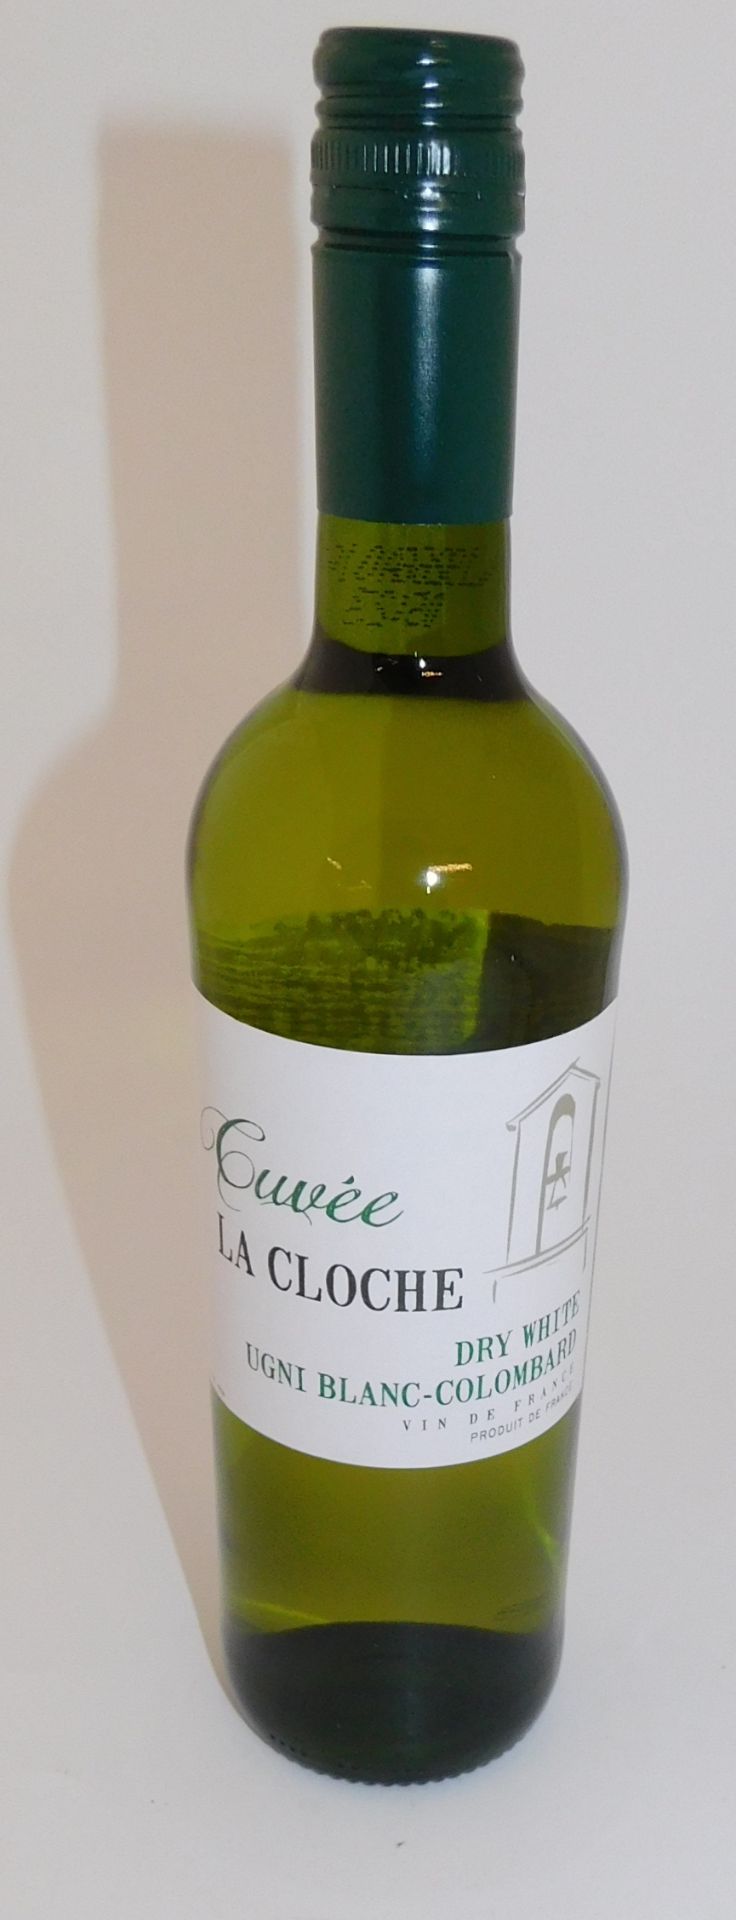 24 Bottles Cuvee La Cloche Dry Blanc Colombard, 75cl (Located Stockport – See General Notes for More